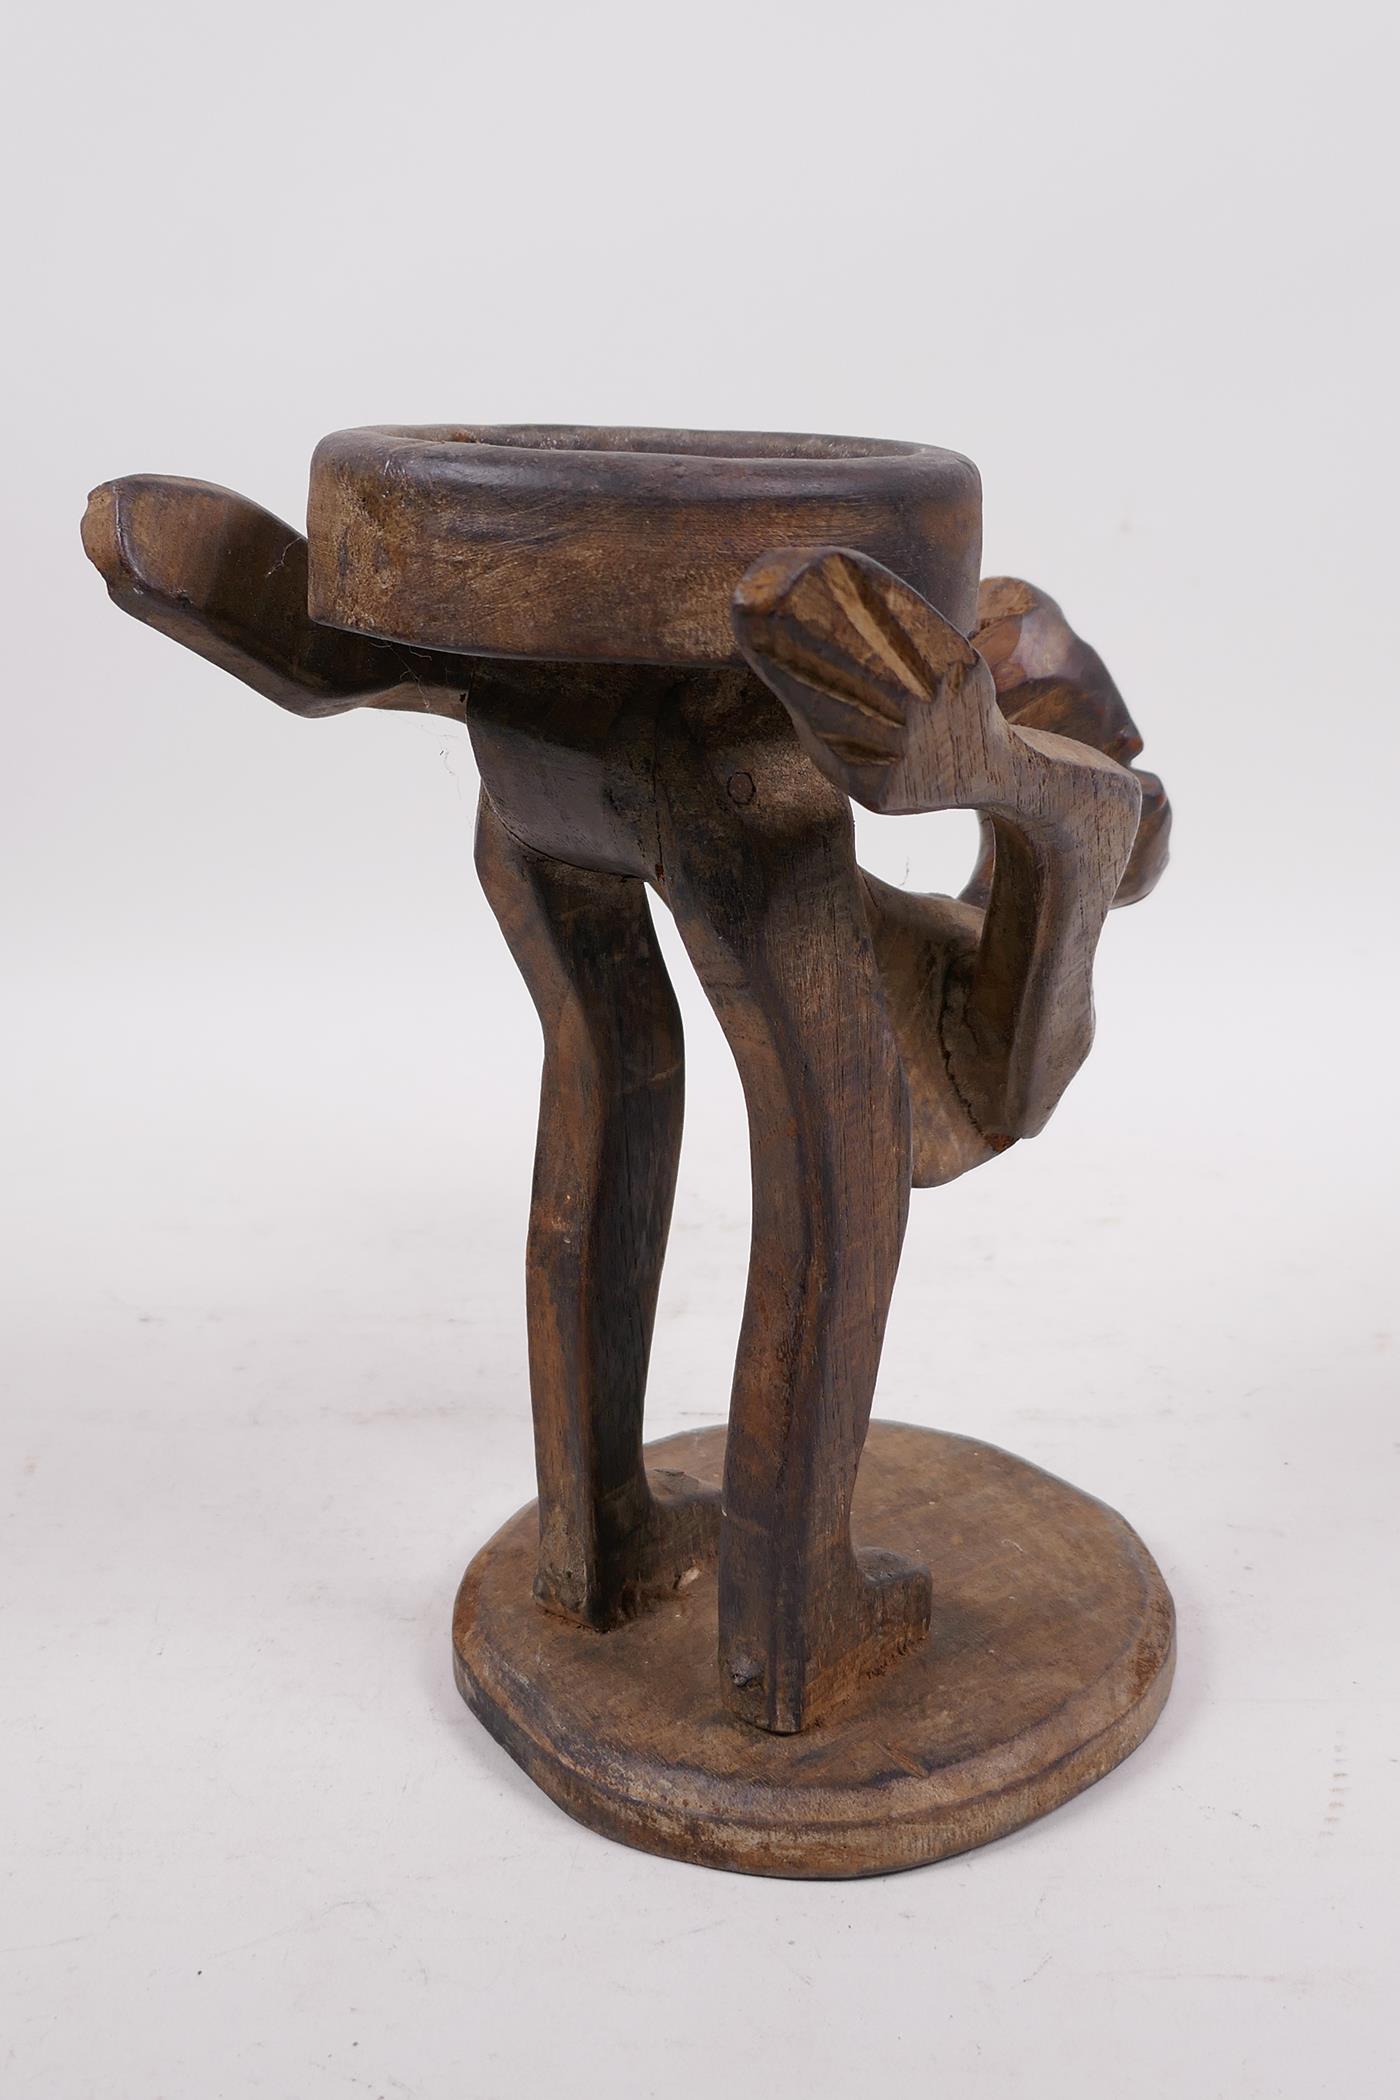 An unusual Indonesian wood figure carved as a stand, 9" high - Image 4 of 4